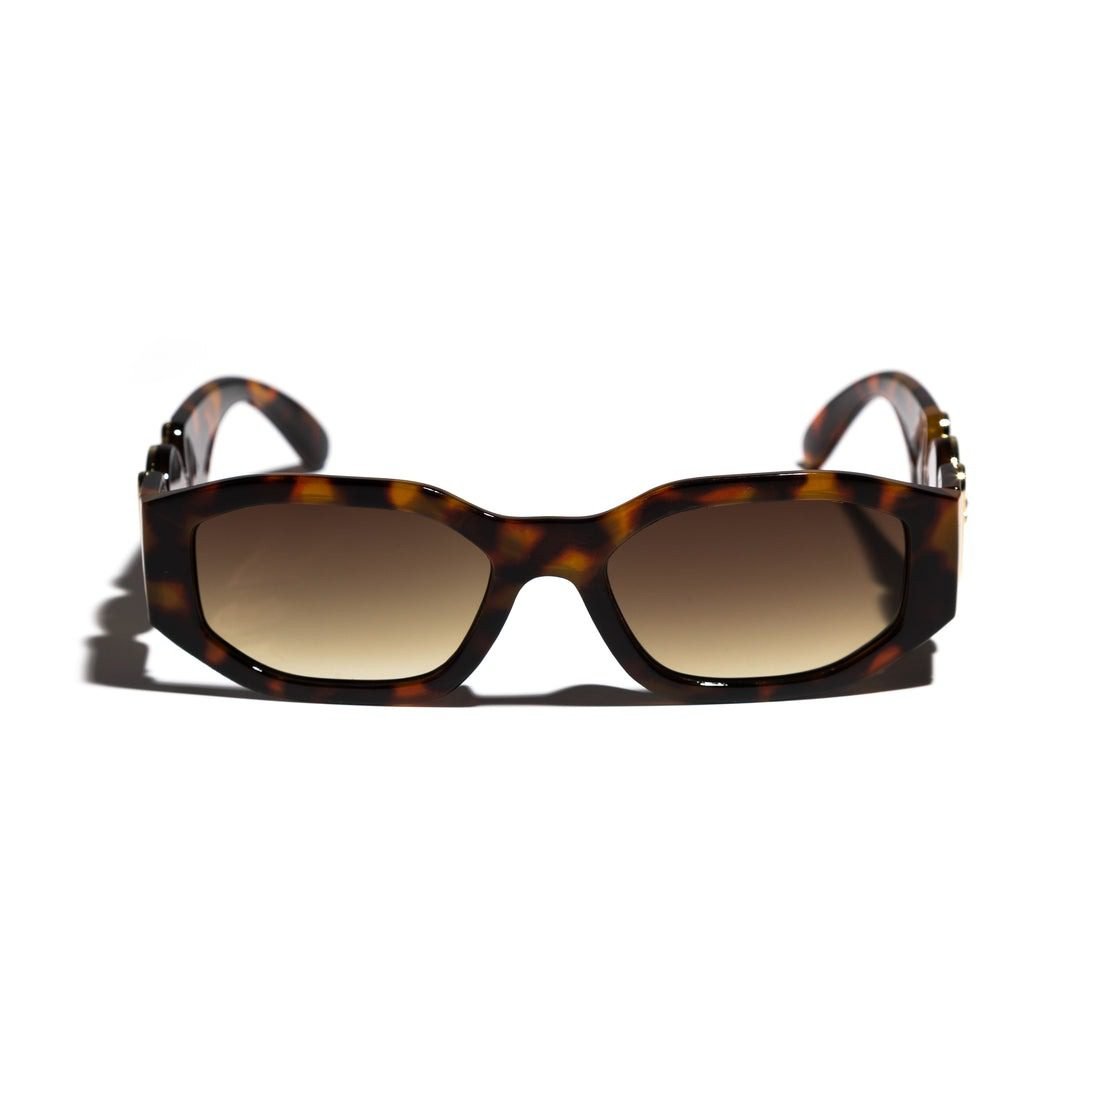 The Glo Gang Glosace Shades (Leopard) Unisex